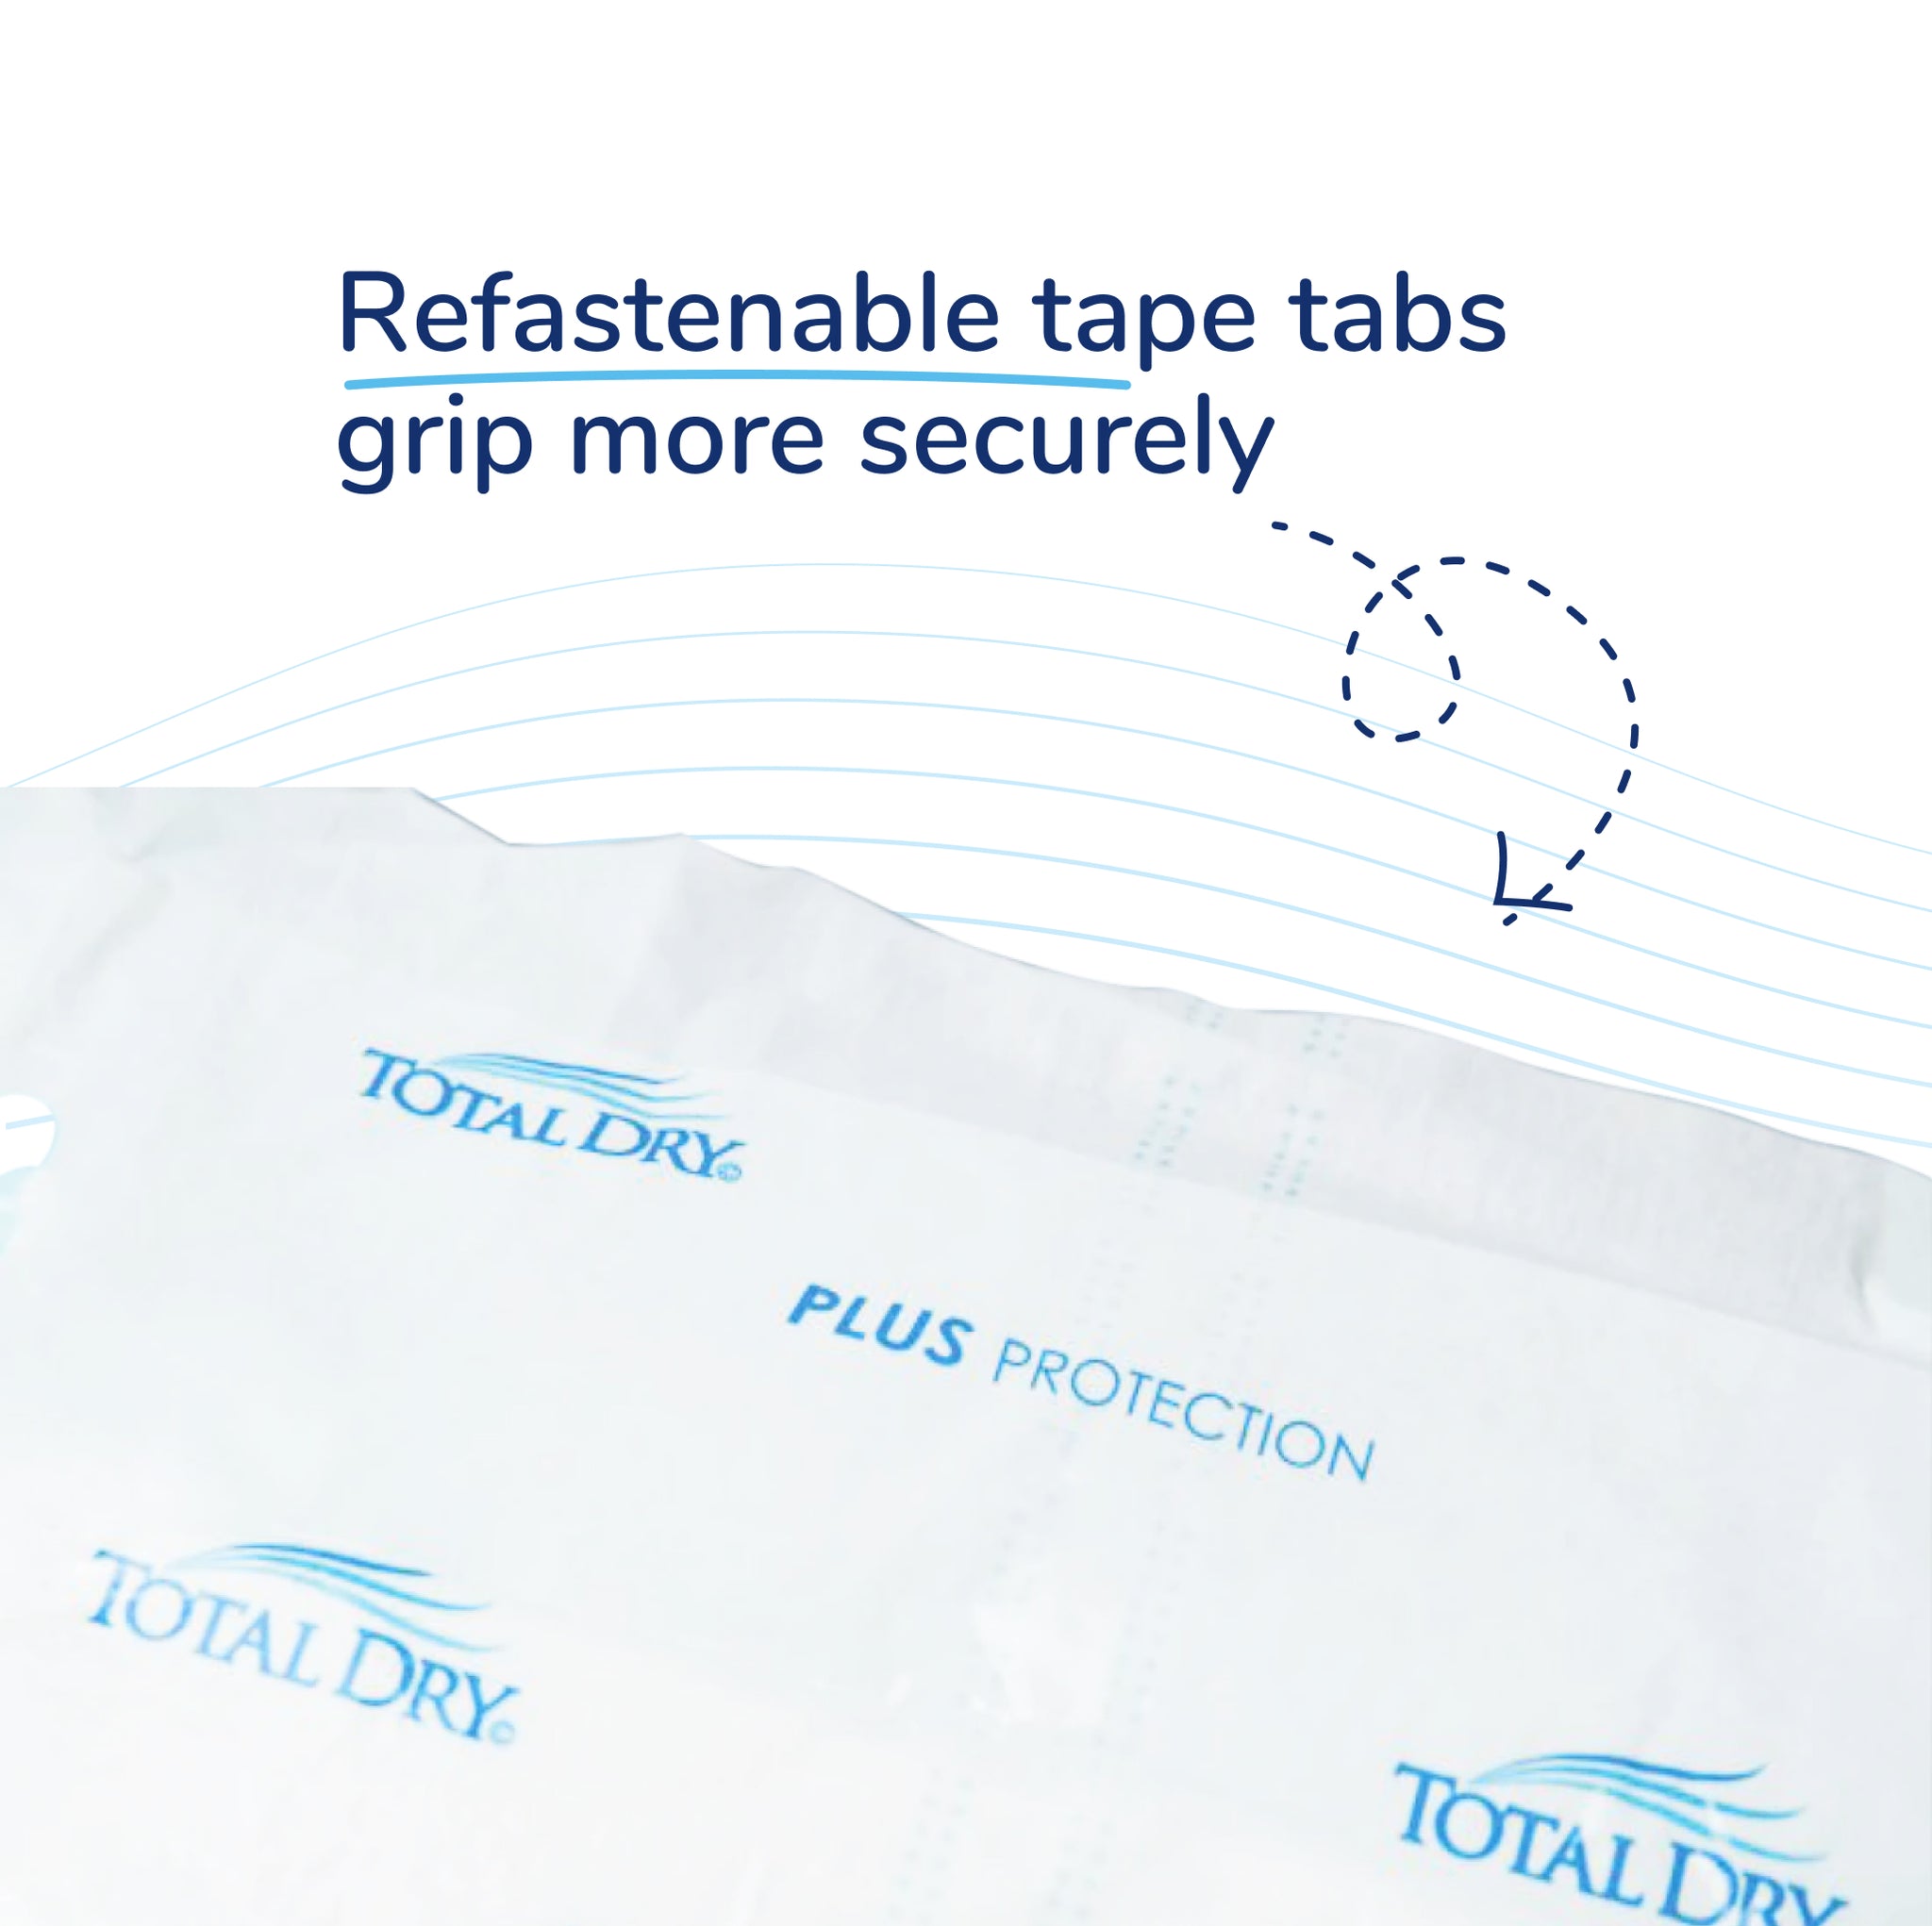 TotalDry Incontinence Brief Liners, Classic Style, Extra Absorbency -  Unisex, Medium, 13 in L